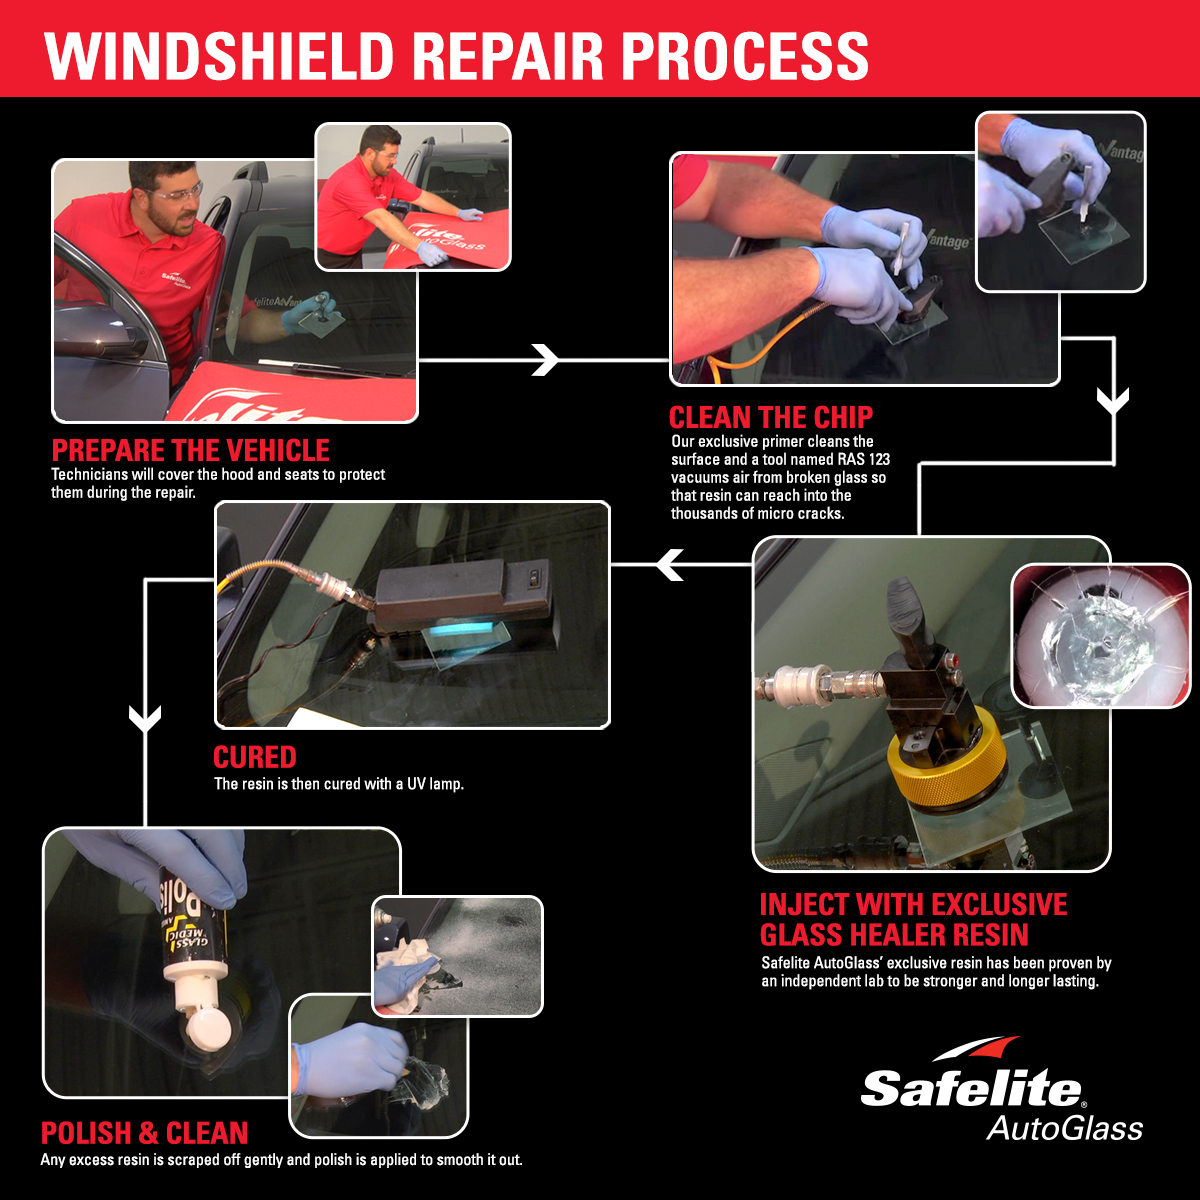 Here are the steps a Safelite technician takes to repair your cracked windshield.